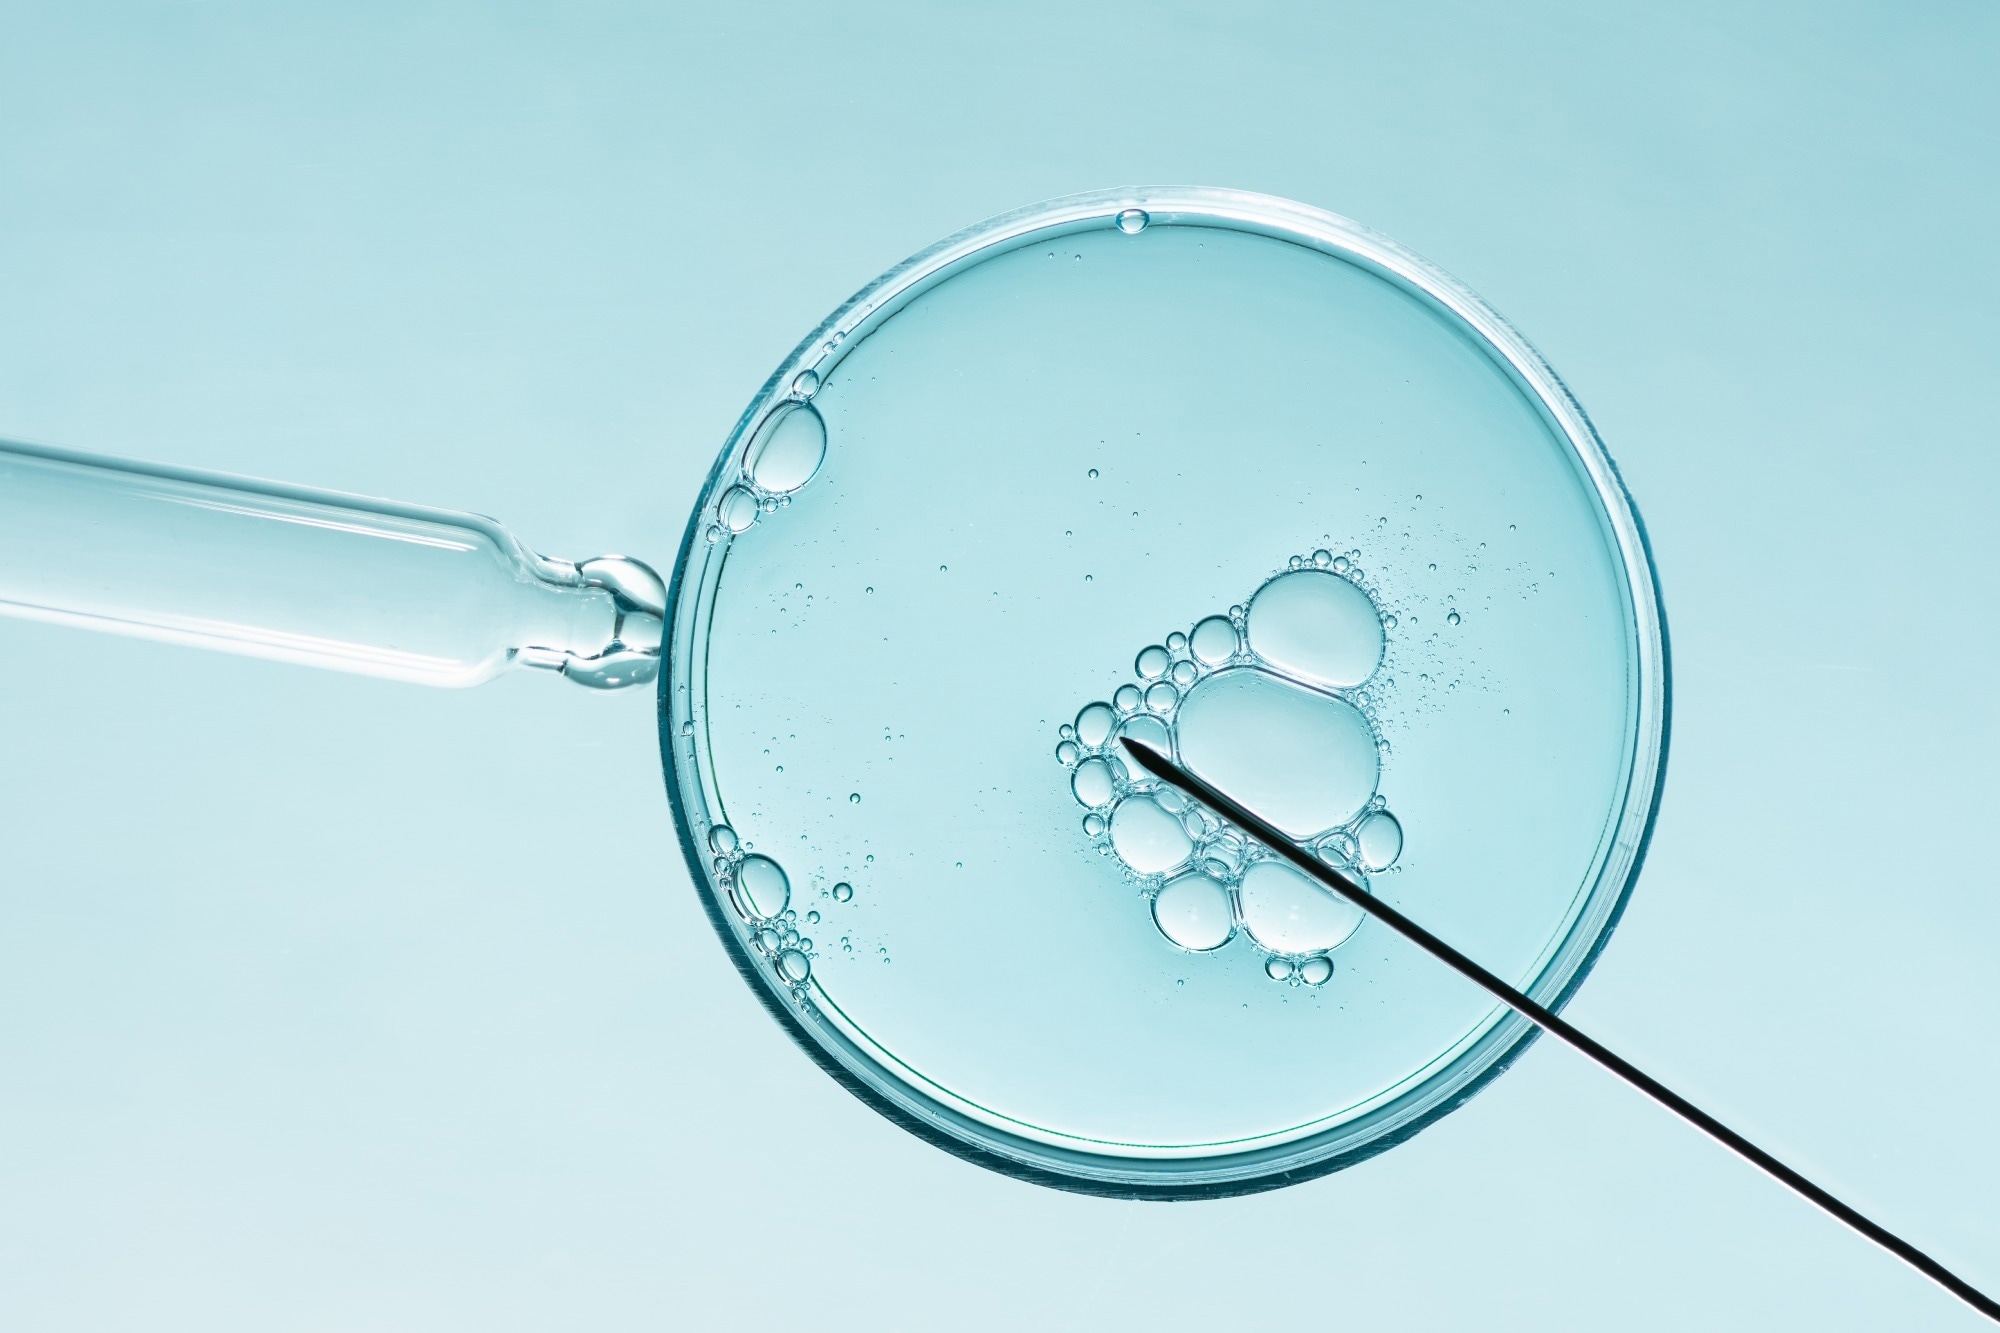 Study: Artificial Intelligence (AI) for Sperm Selection – a Systematic Review. Image Credit: Inna Dodor / Shutterstock.com